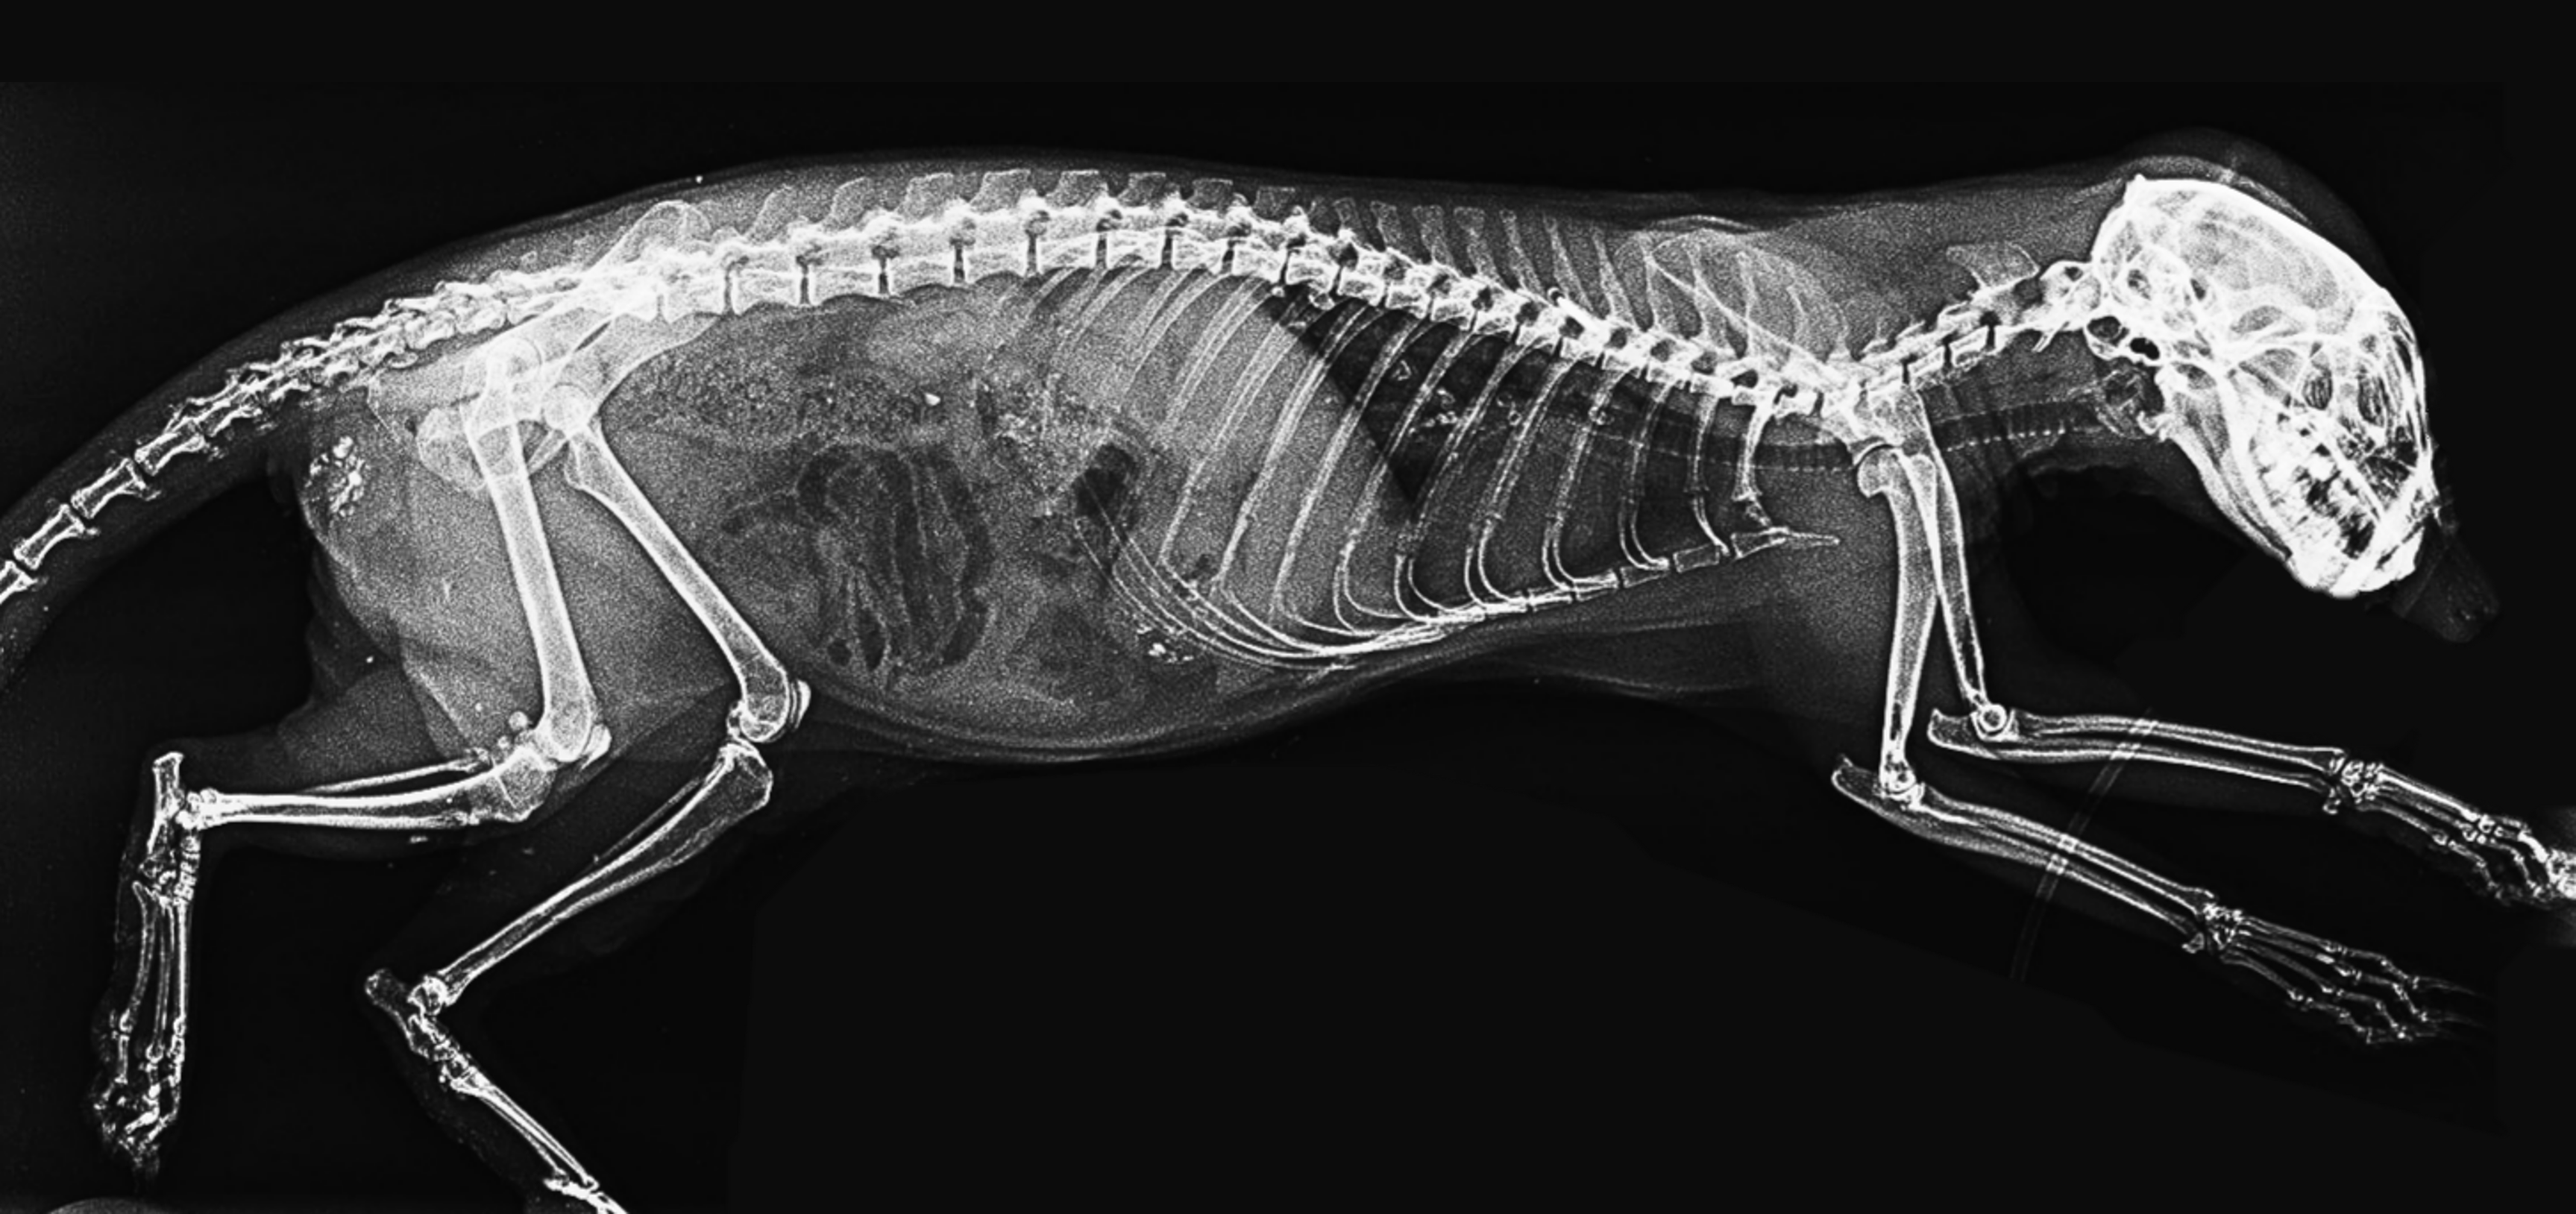 An X-ray of a meerkat 